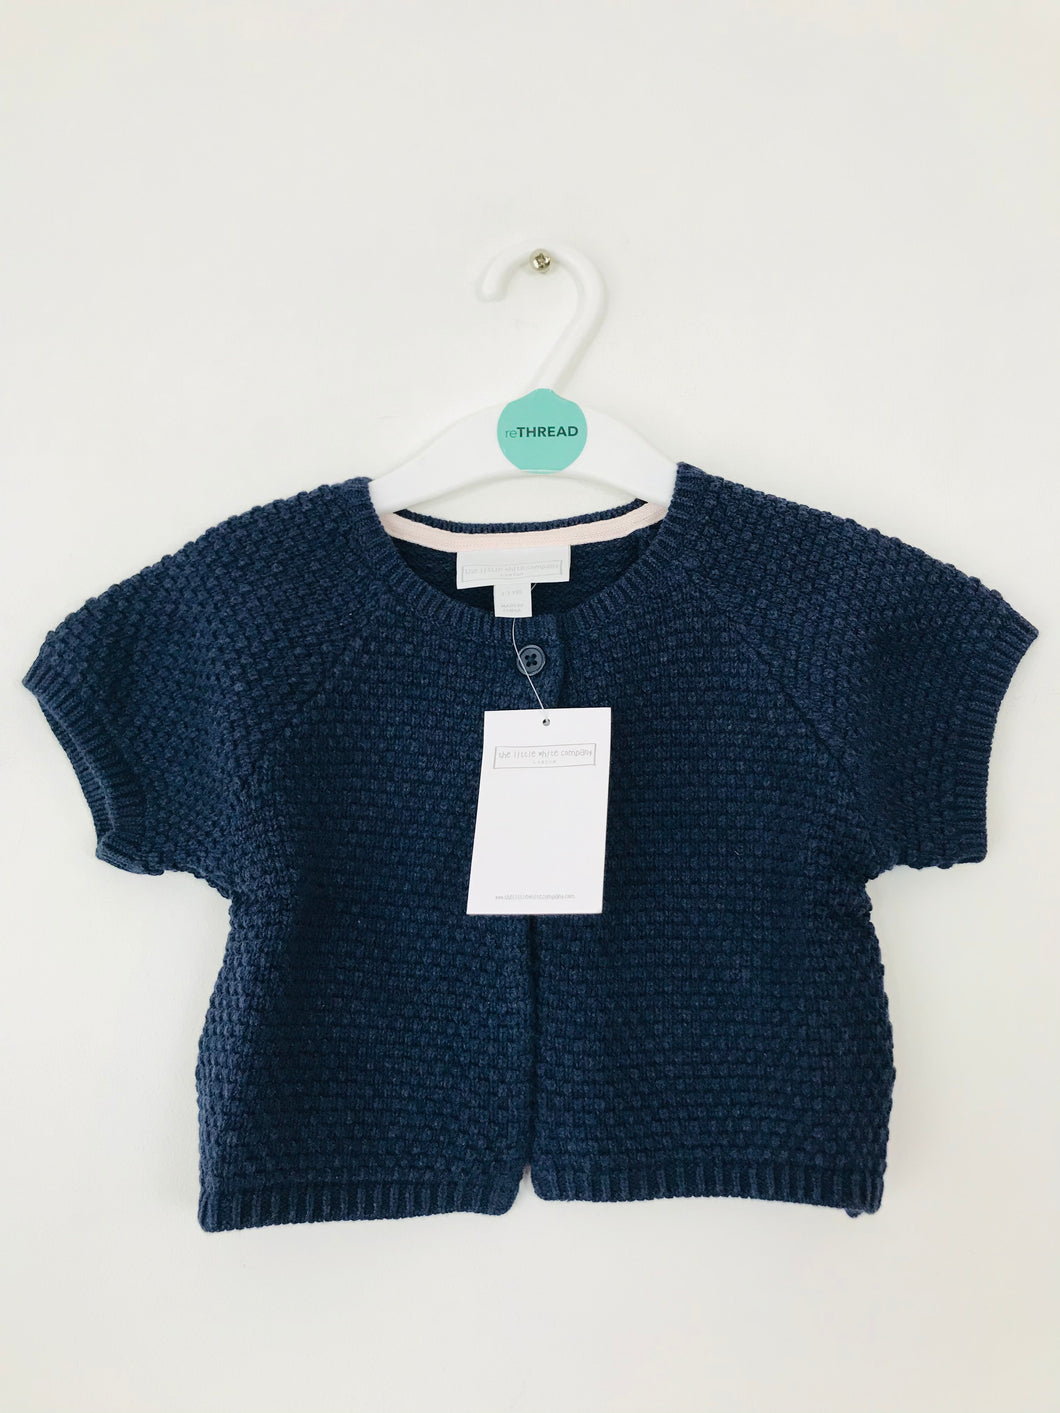 The Little White Company NWT Kids Short Sleeve Cardigan | 2-3 years | Blue